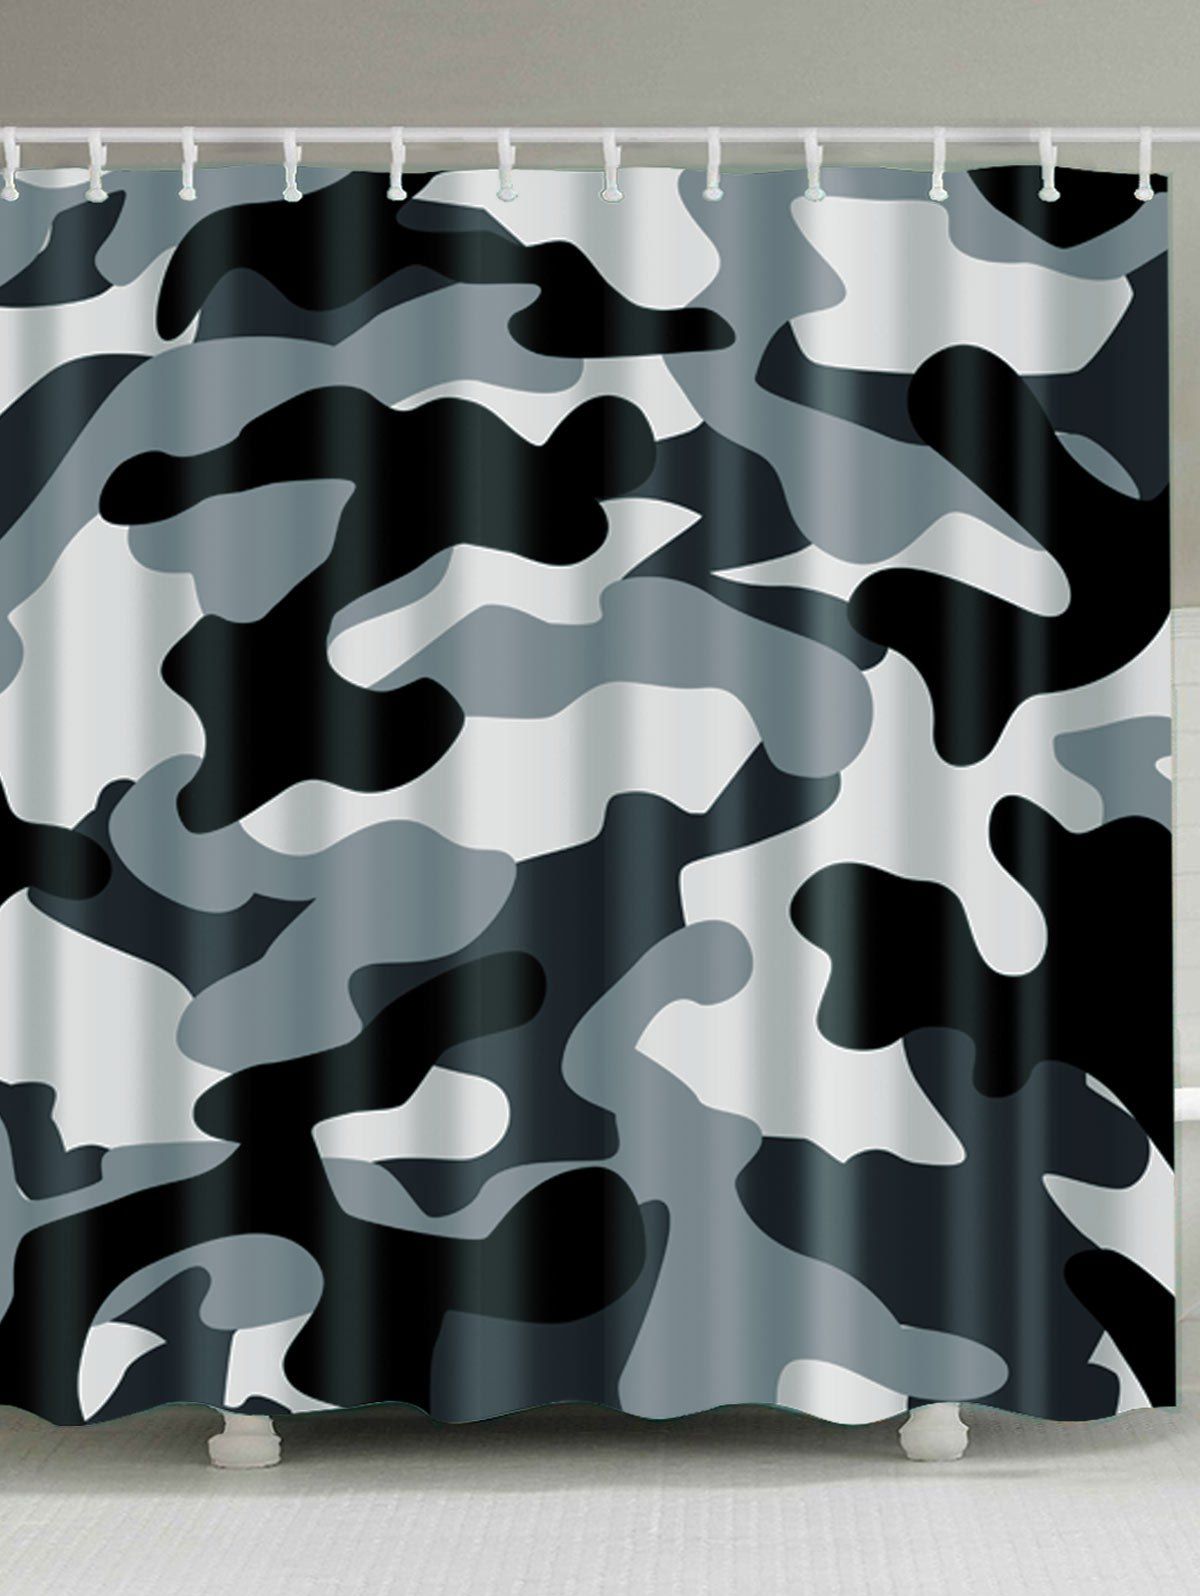 Thicken Camo Polyester Fabric Shower Curtain - ACU CAMOUFLAGE W71 INCH * L79 INCH